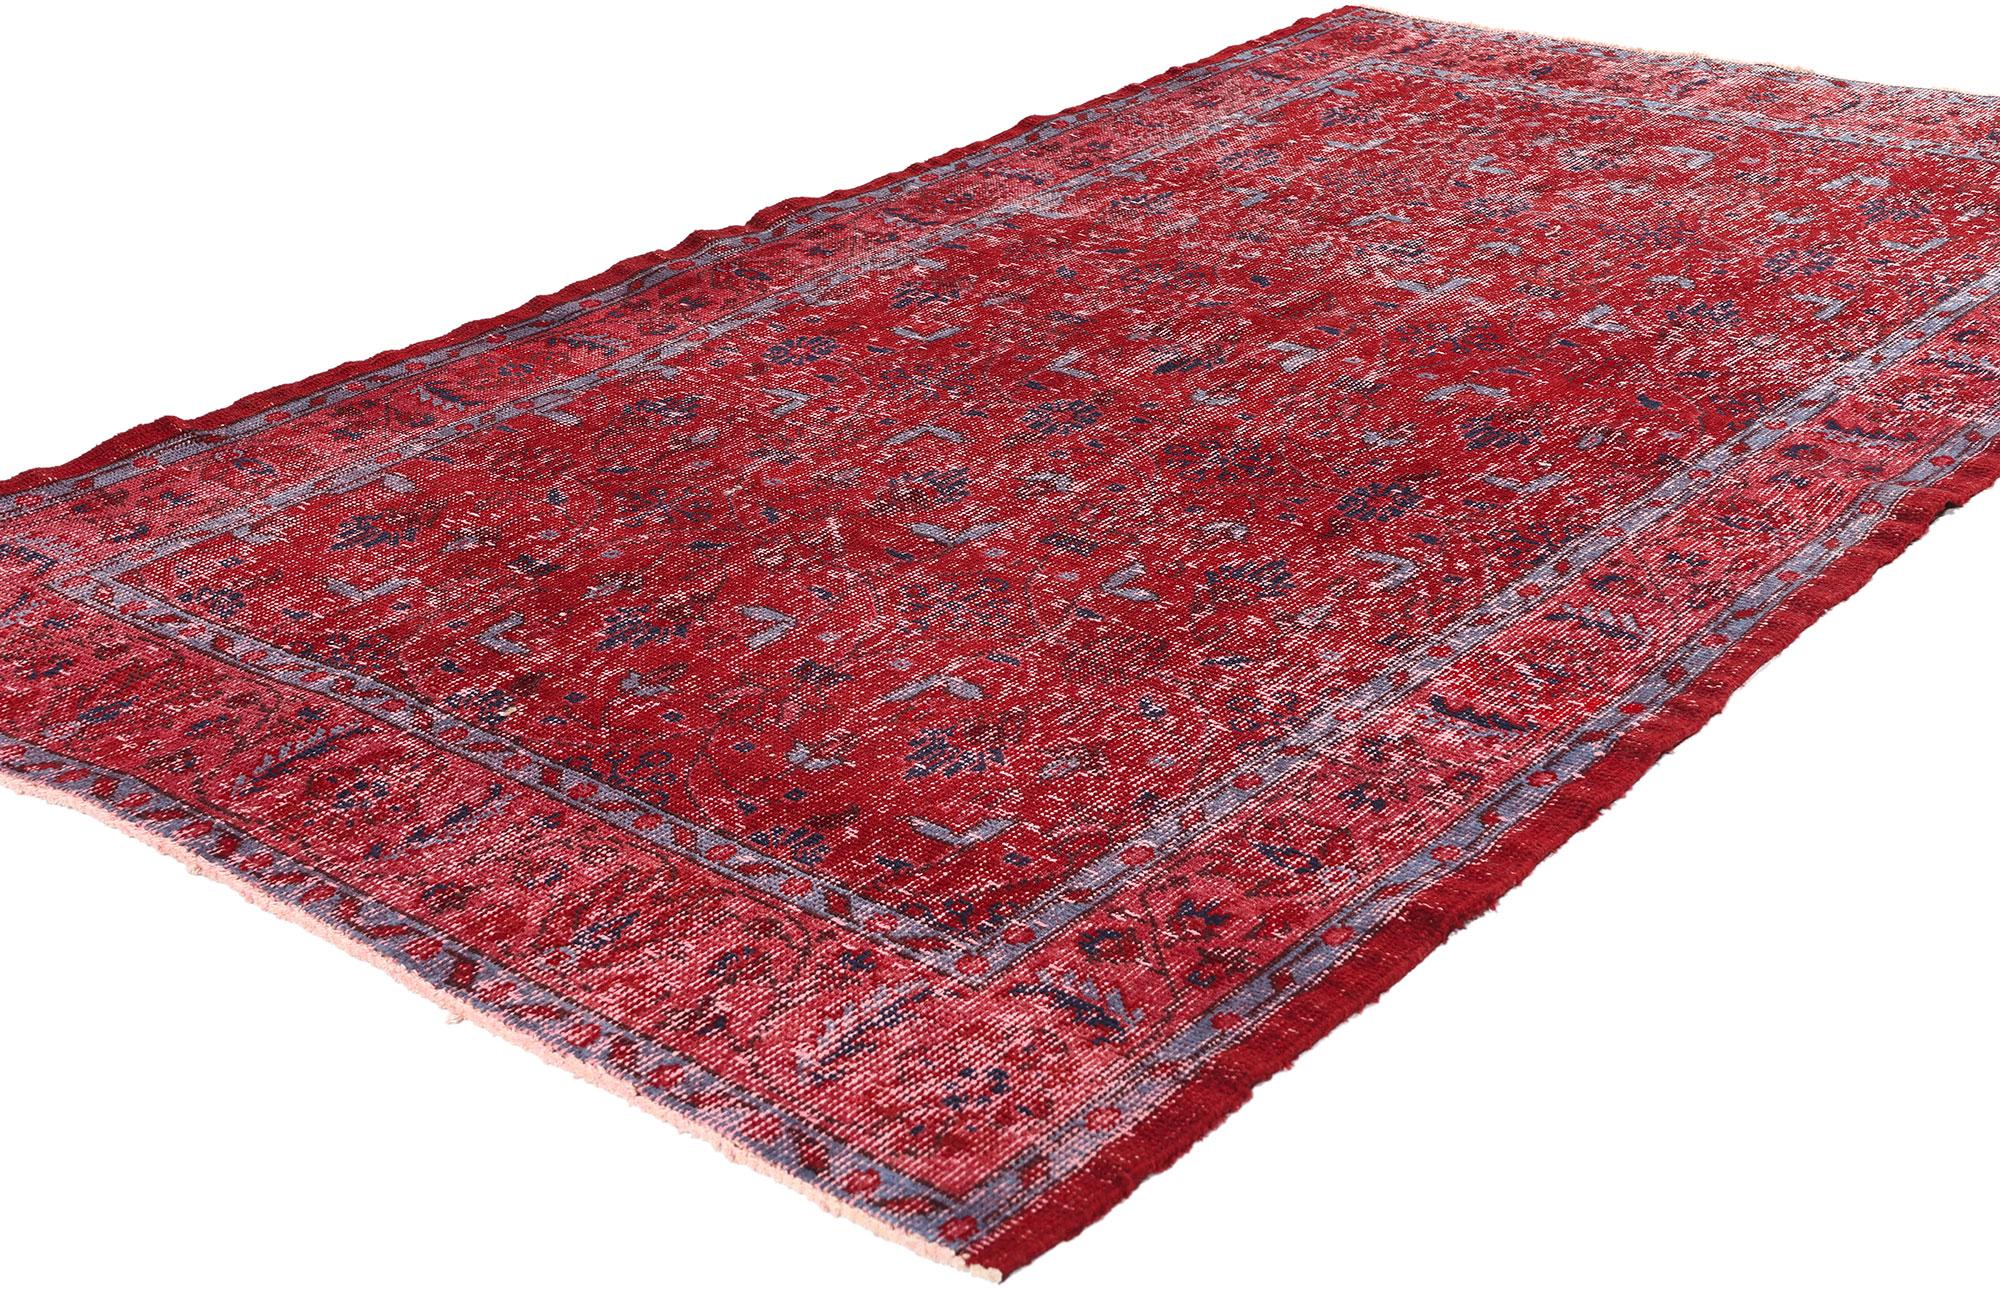 52012 Distressed Vintage Turkish Sivas Rug, 04'00 x 06'10. Distressed Turkish Sivas rugs that retain their vibrant colors are traditional rugs originating from Sivas in central Anatolia, Turkey. These rugs undergo intentional aging processes, such